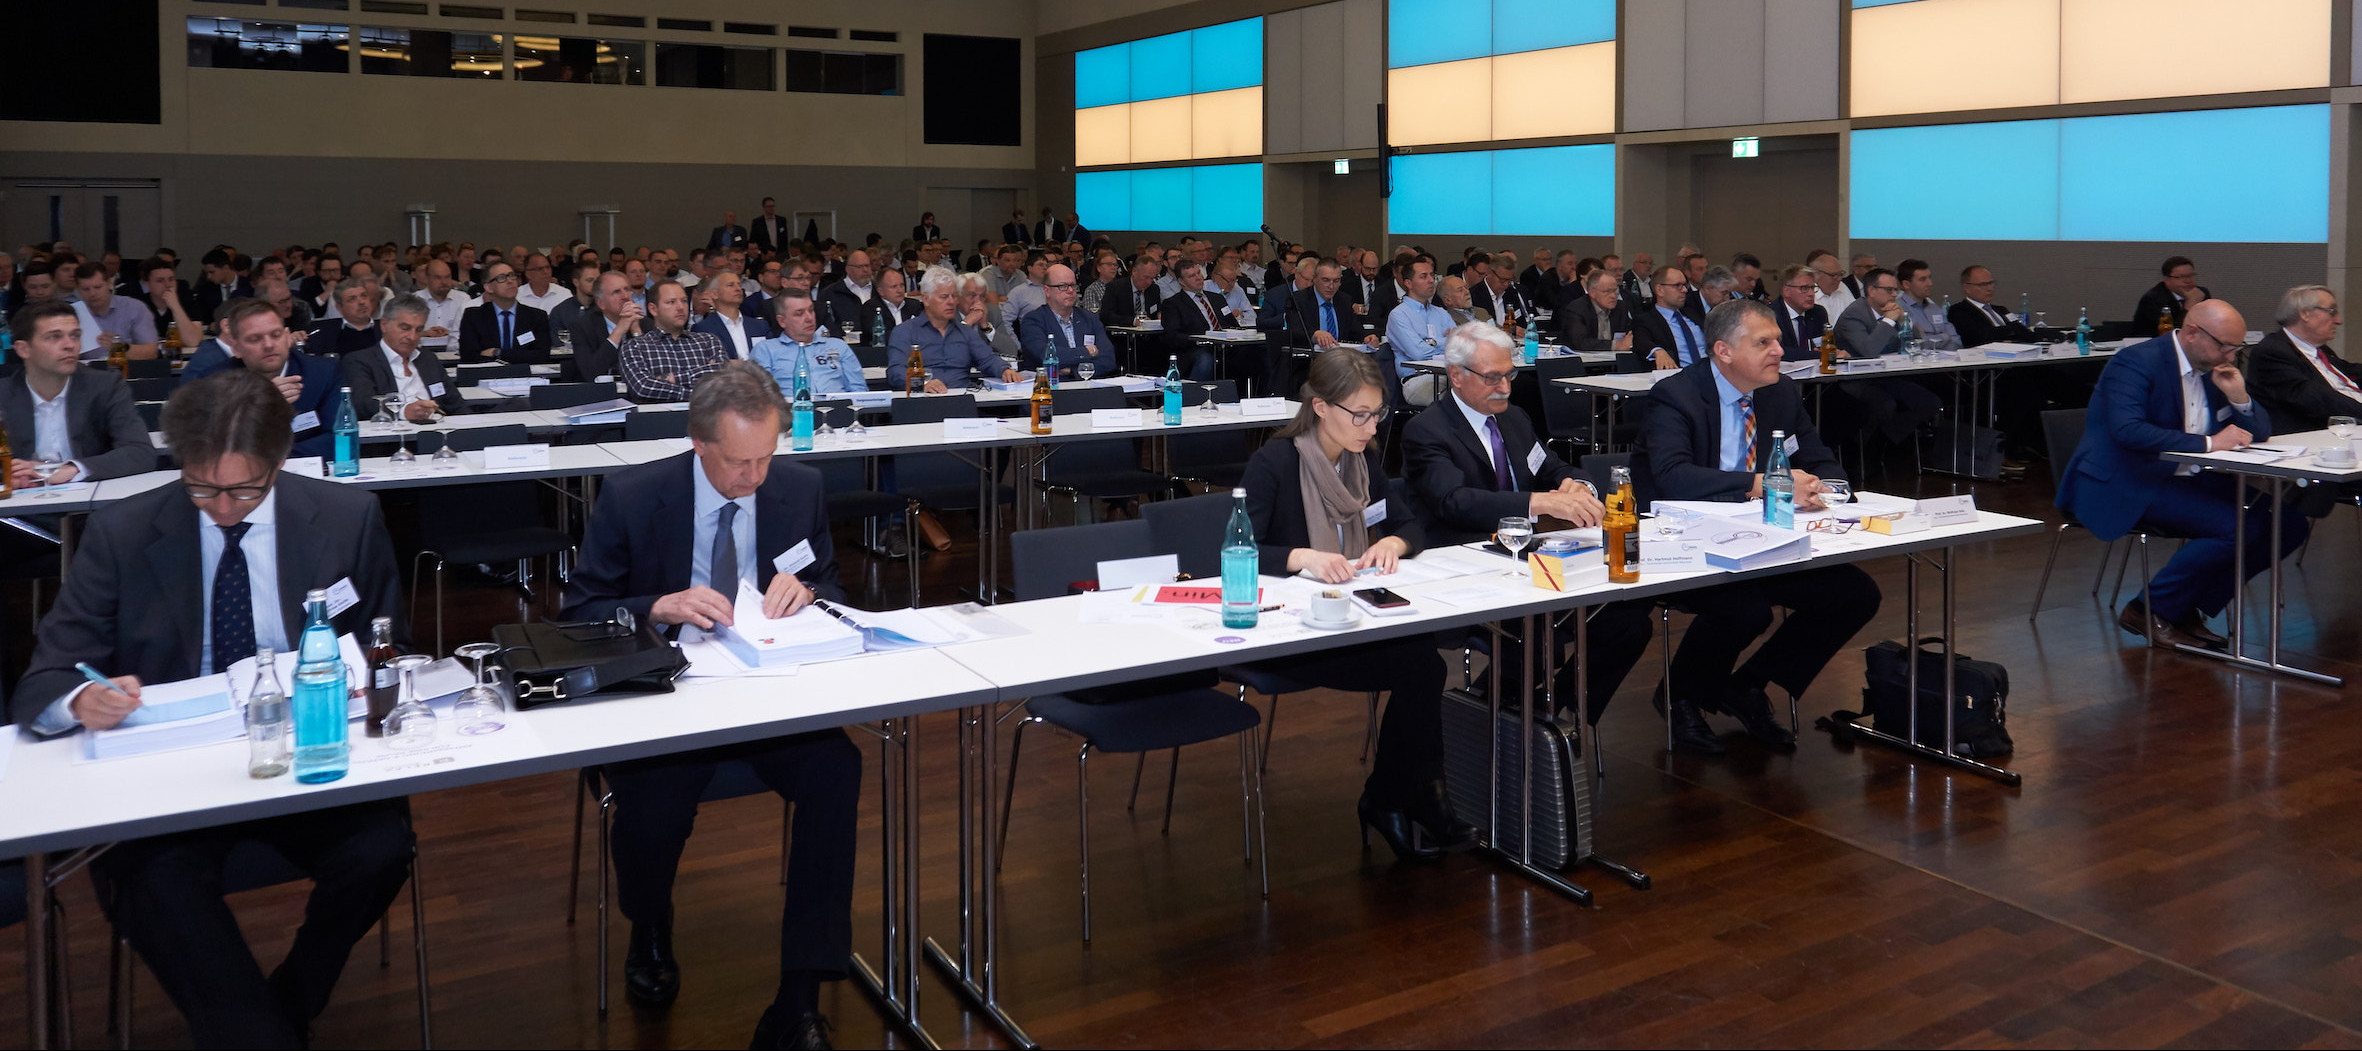 The Stanzkongress is always attended by numerous prominent representatives from research and industry, including TUM professors Prof. Dr. Hartmut Hoffmann and Prof. Dr. Wolfram Volk (front row). © KIST